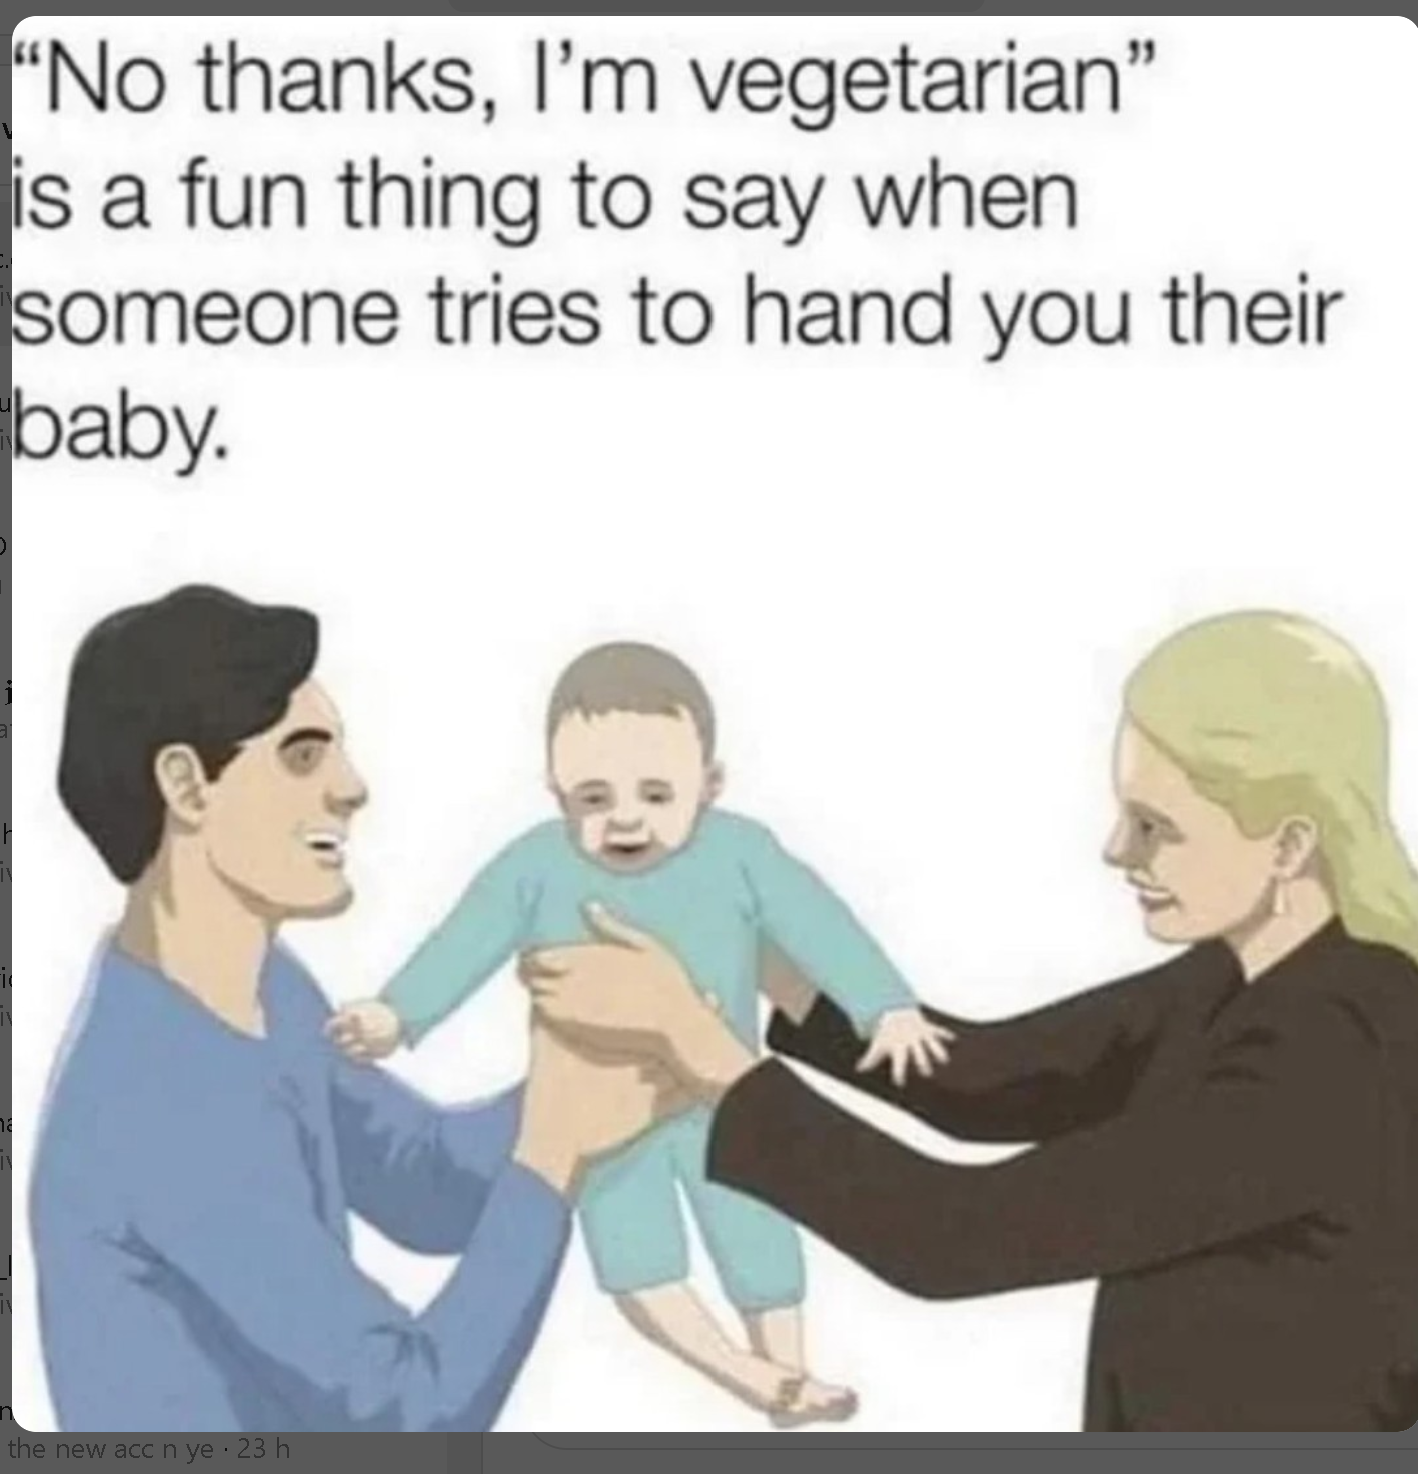 dank memes - funny memes - no thanks im vegetarian meme - "No thanks, I'm vegetarian" is a fun thing to say when someone tries to hand you their baby. the ceny 2311